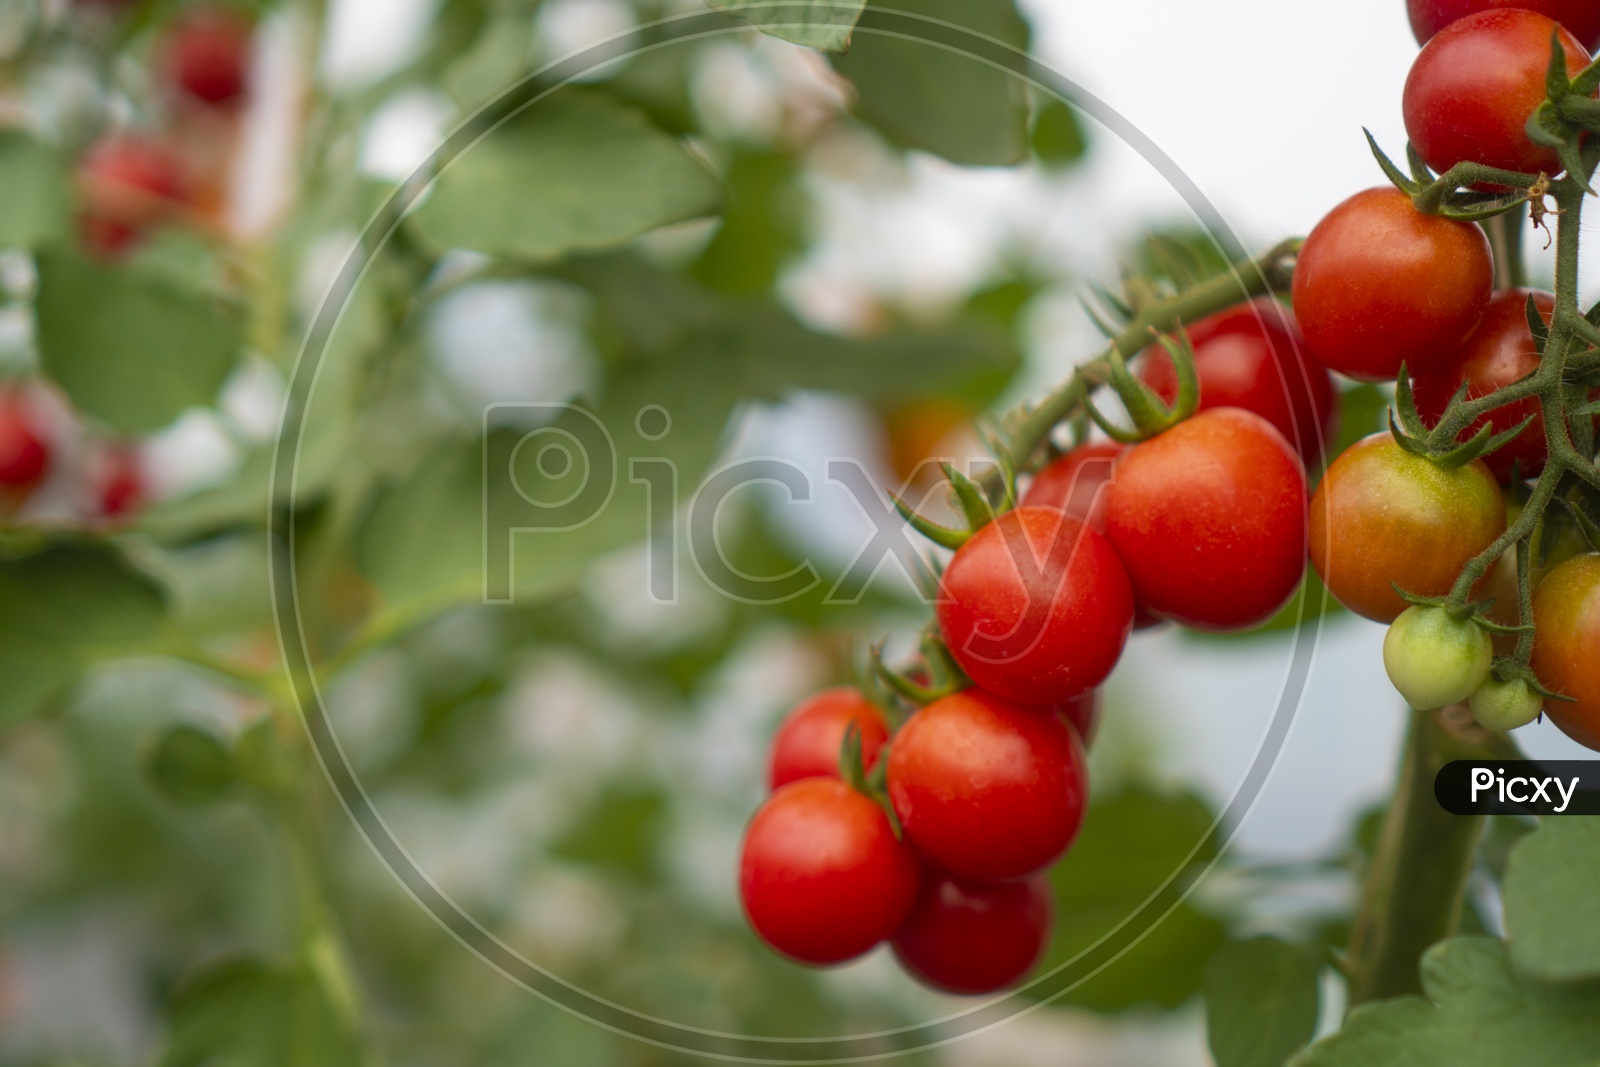 Tomatoes Farming Using Technology In Green Houses